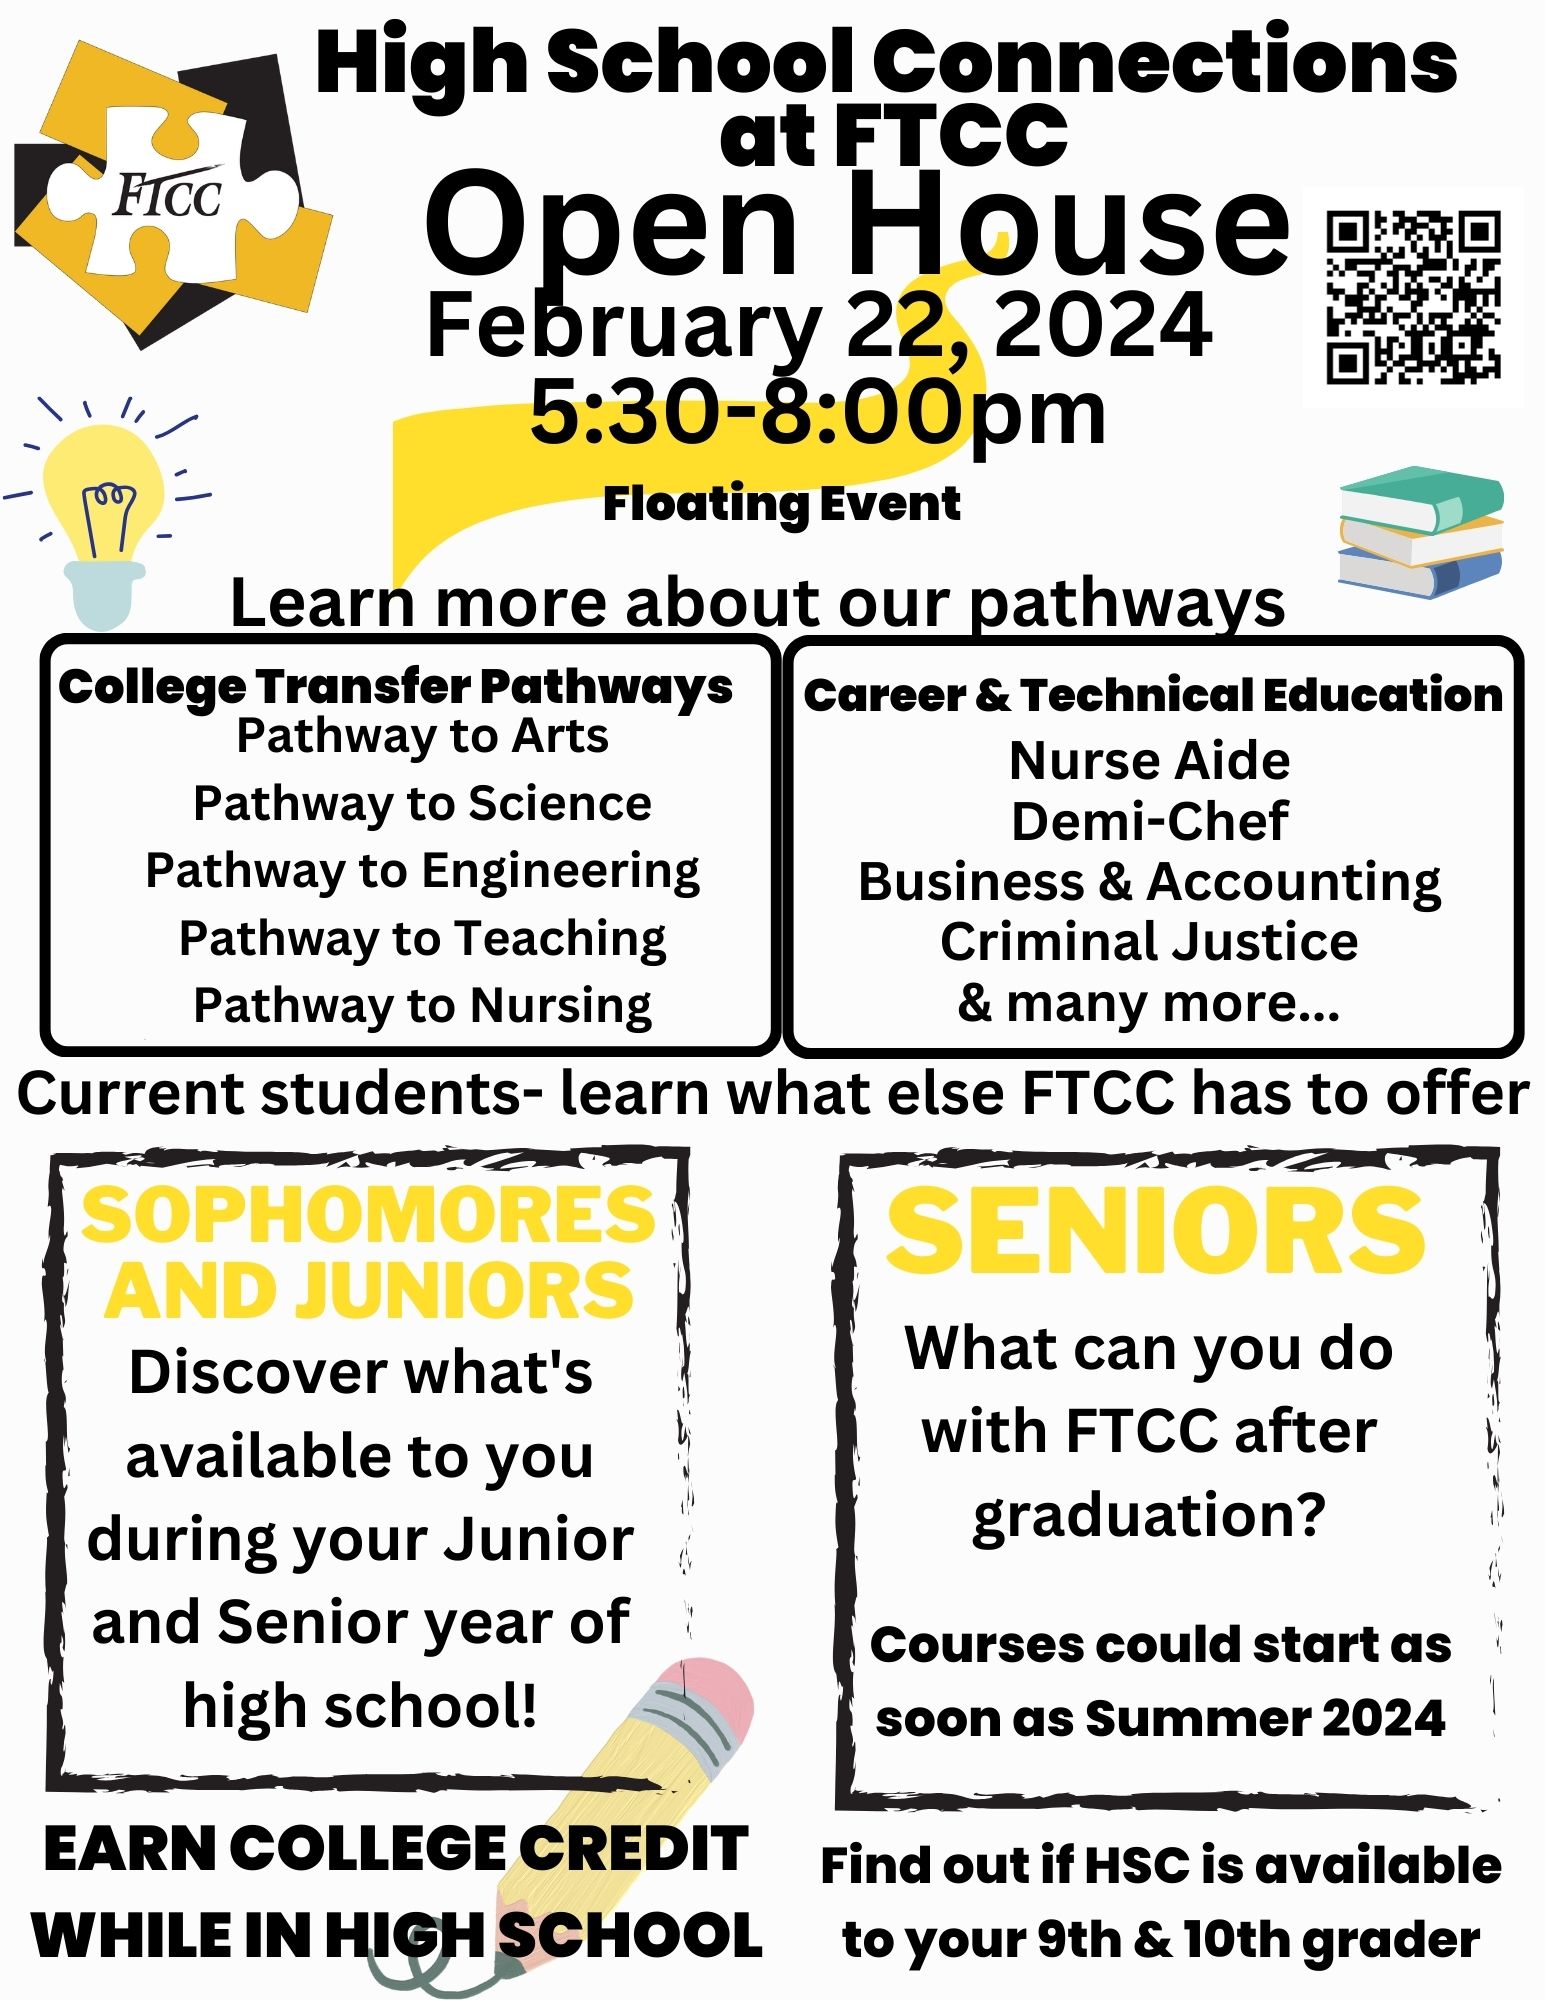 image promoting High School Connections Open House on February 22, 2024.